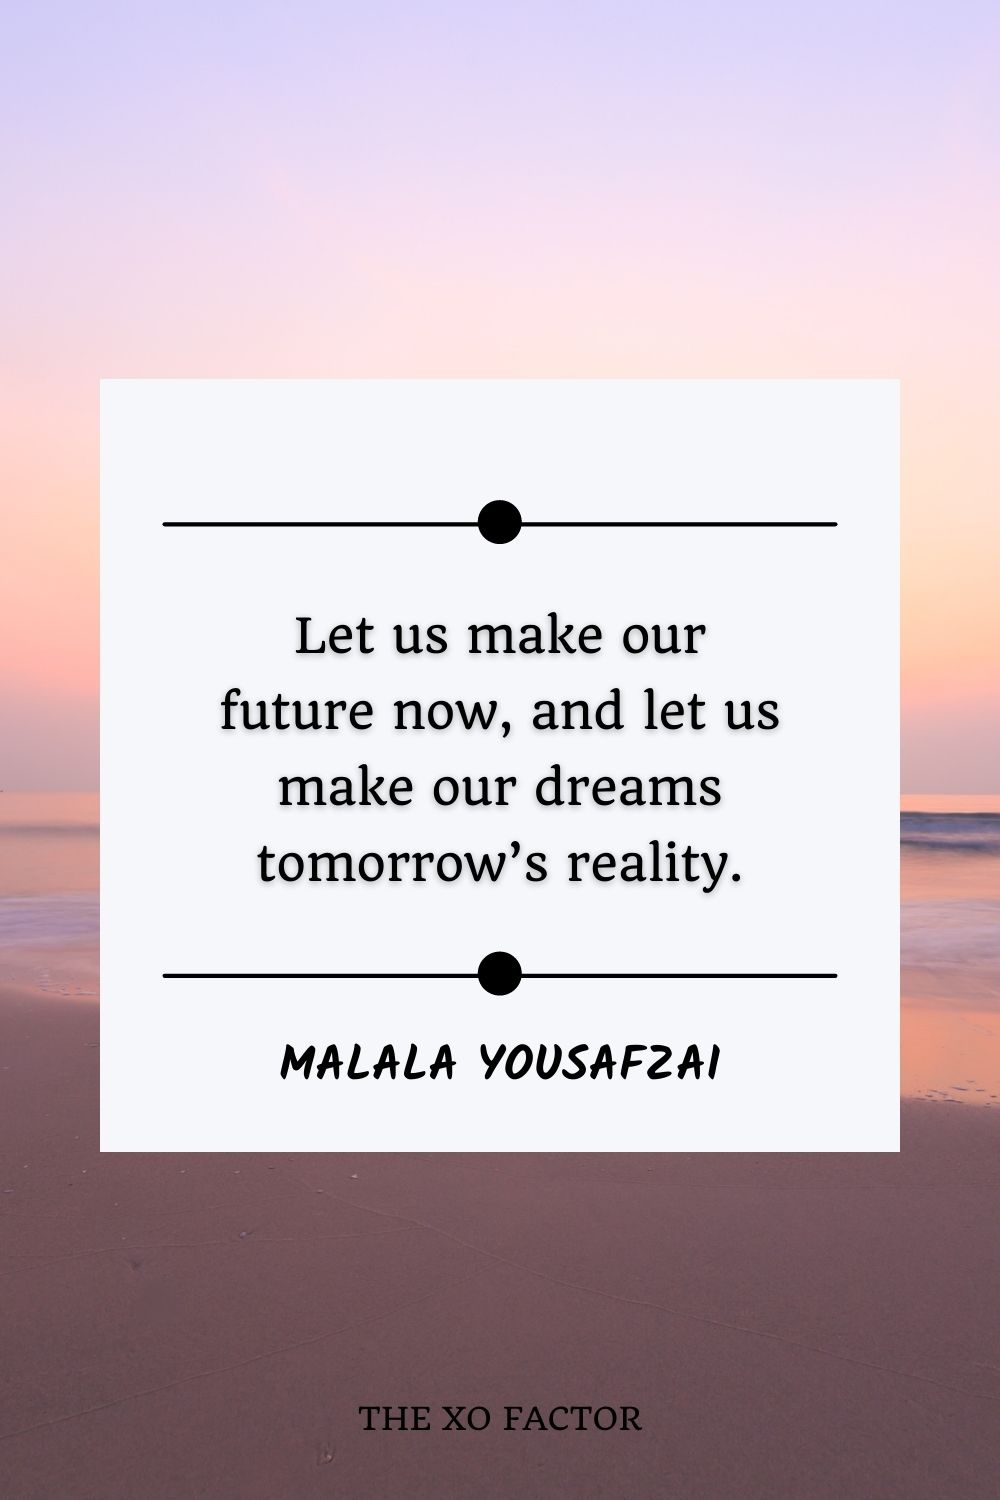 Let us make our future now, and let us make our dreams tomorrow’s reality.” –  Malala Yousafzai